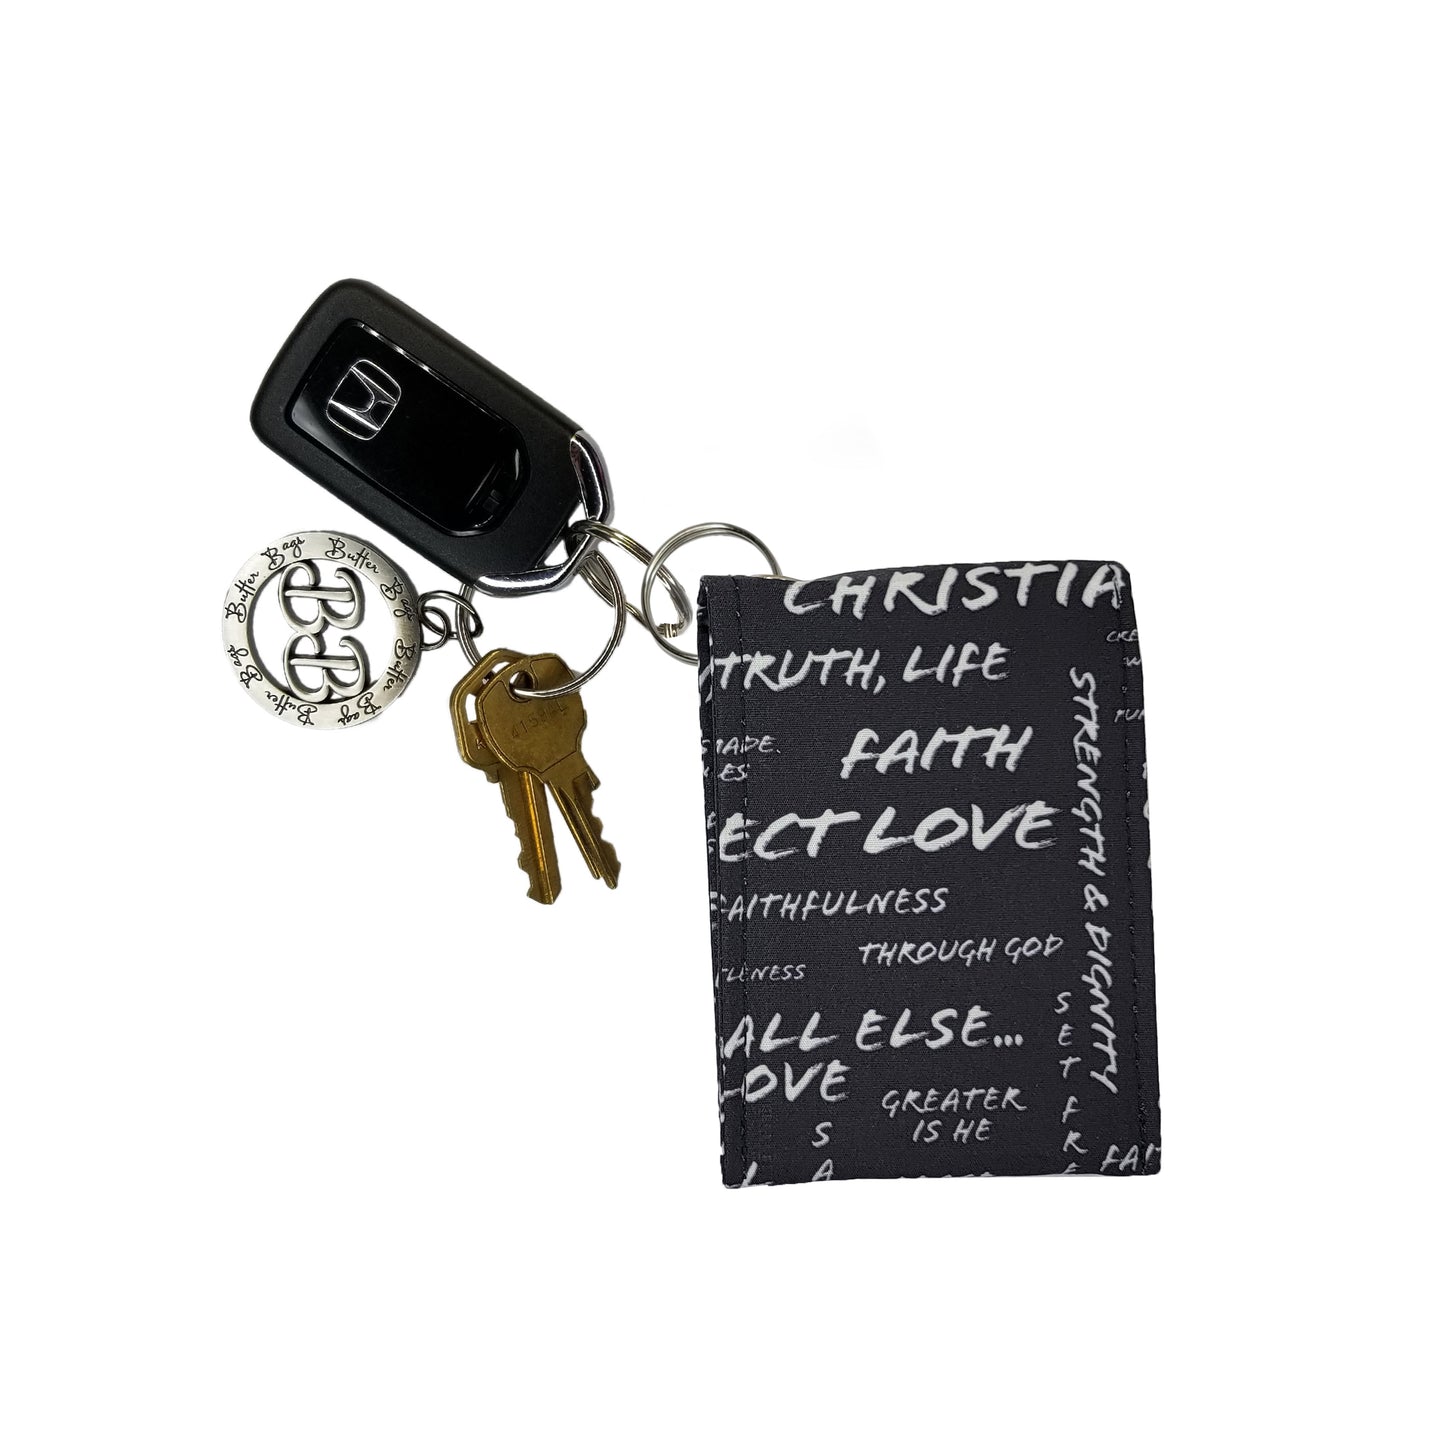 The Message-Keychain Wallet